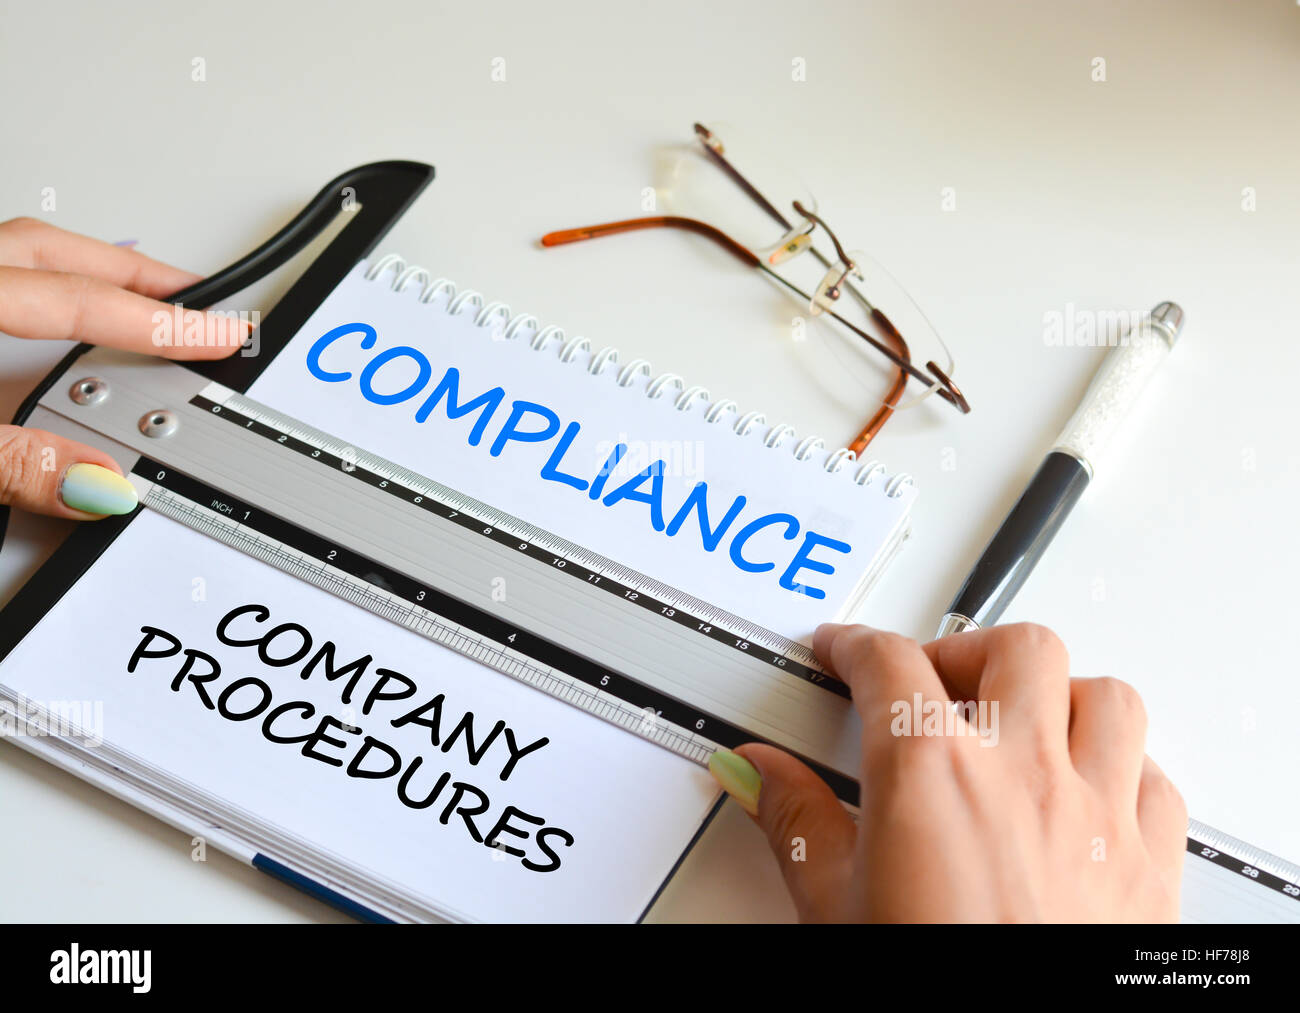 Compliance to company procedures and policies Stock Photo